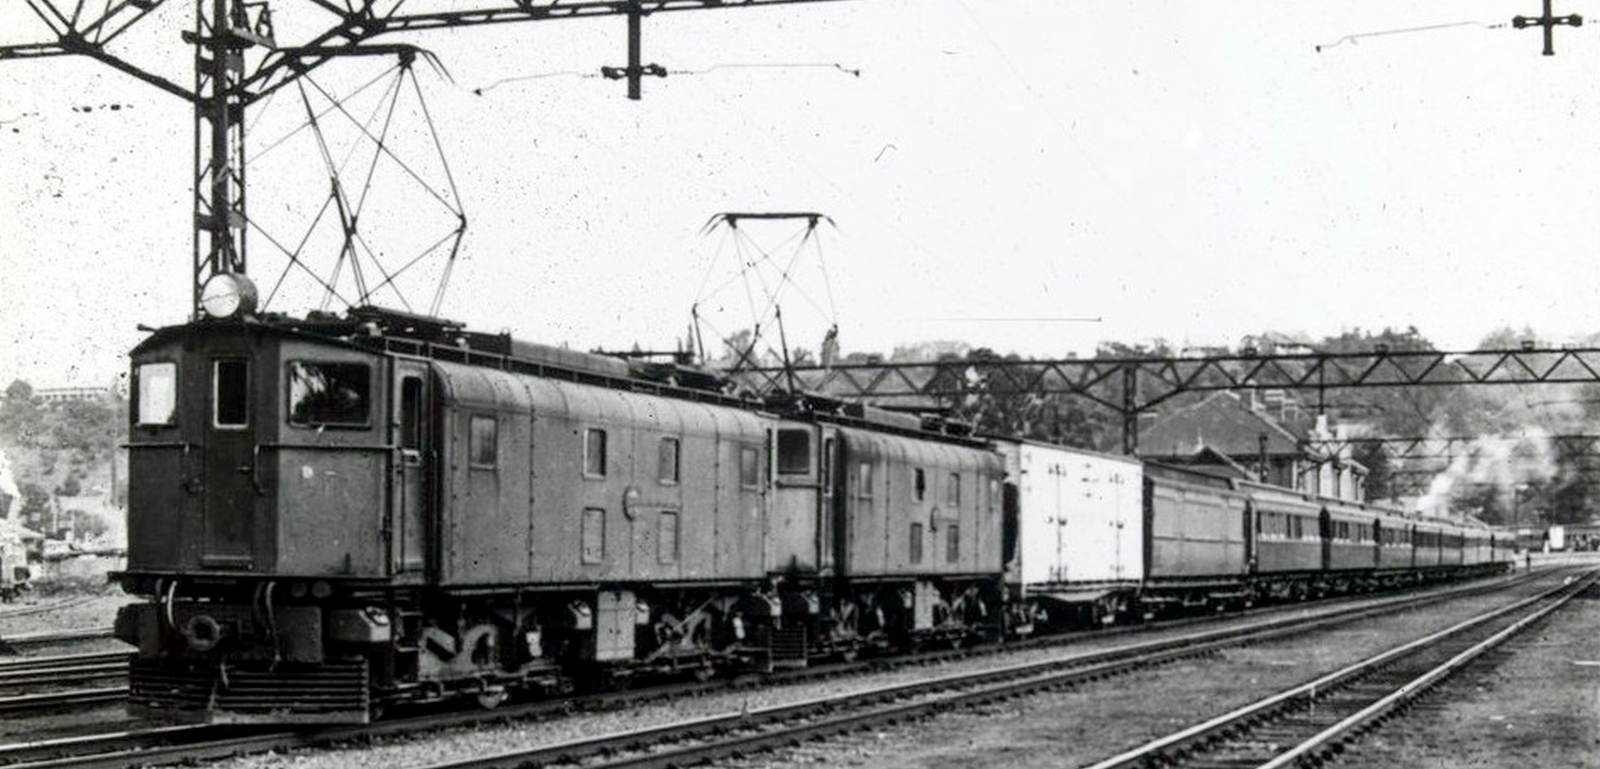 Two 1E around 1930 in front of an express train